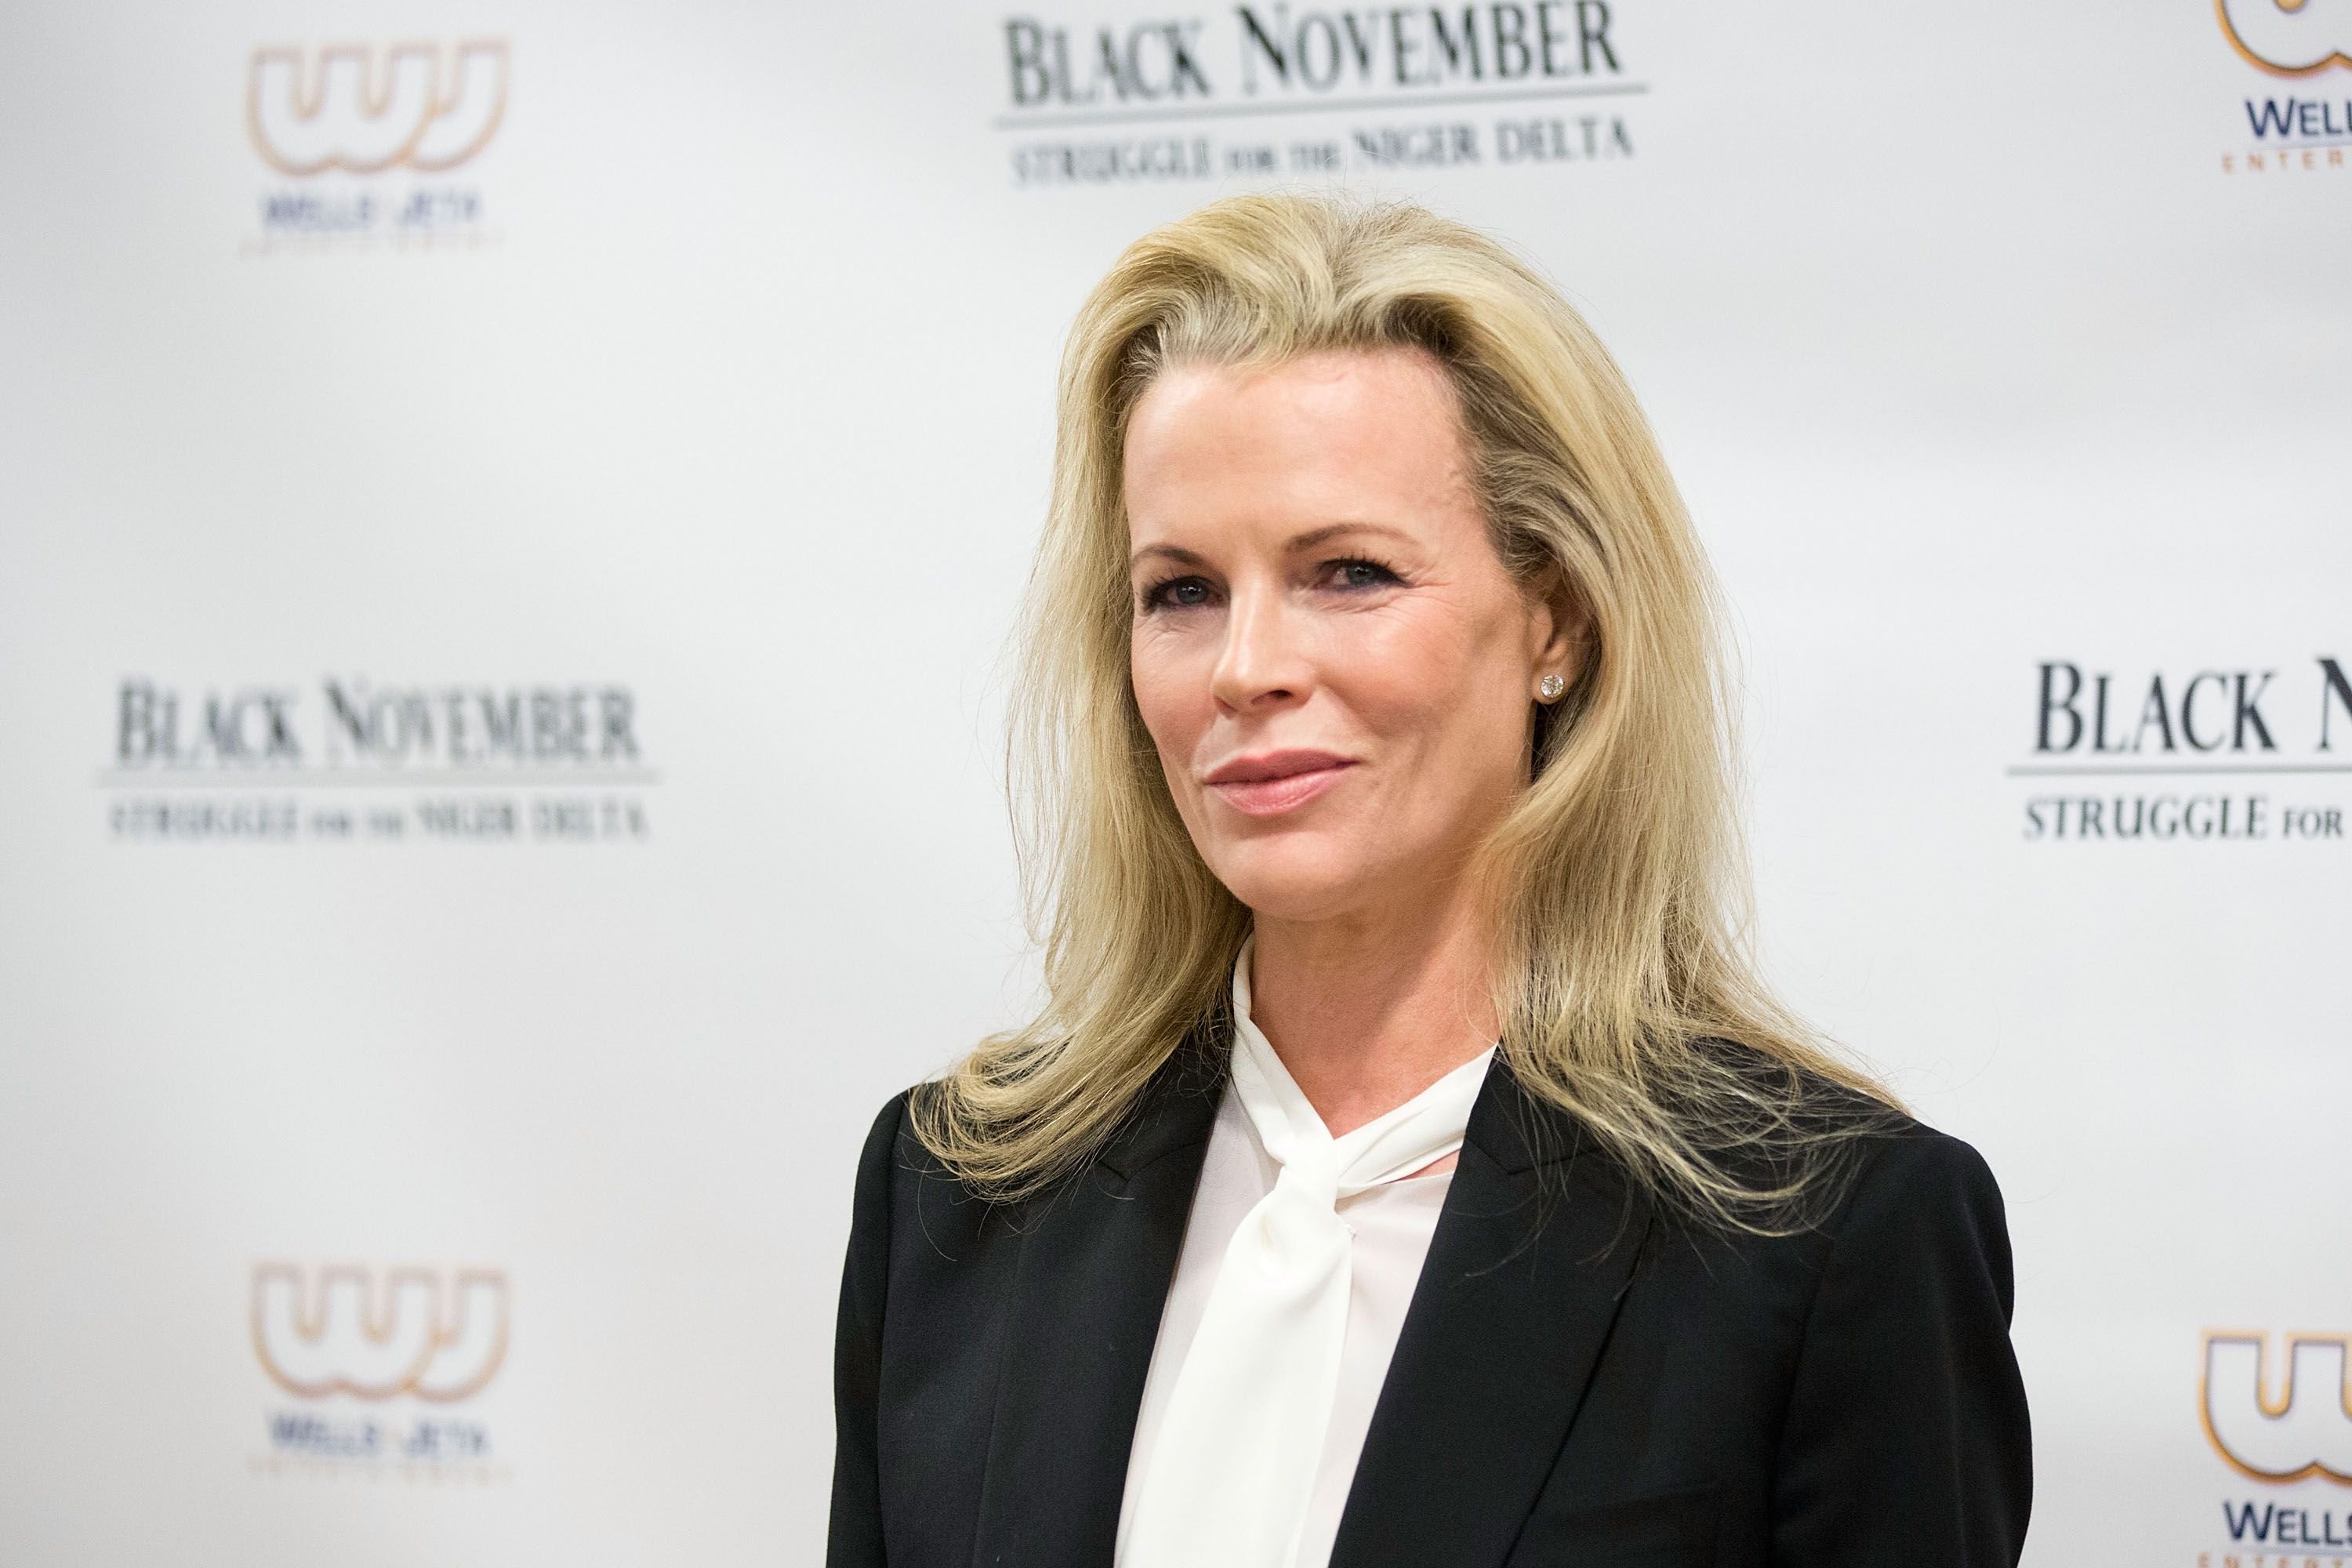 Kim Basinger attends the "Black November" New York City Premiere. | Source: Getty Images